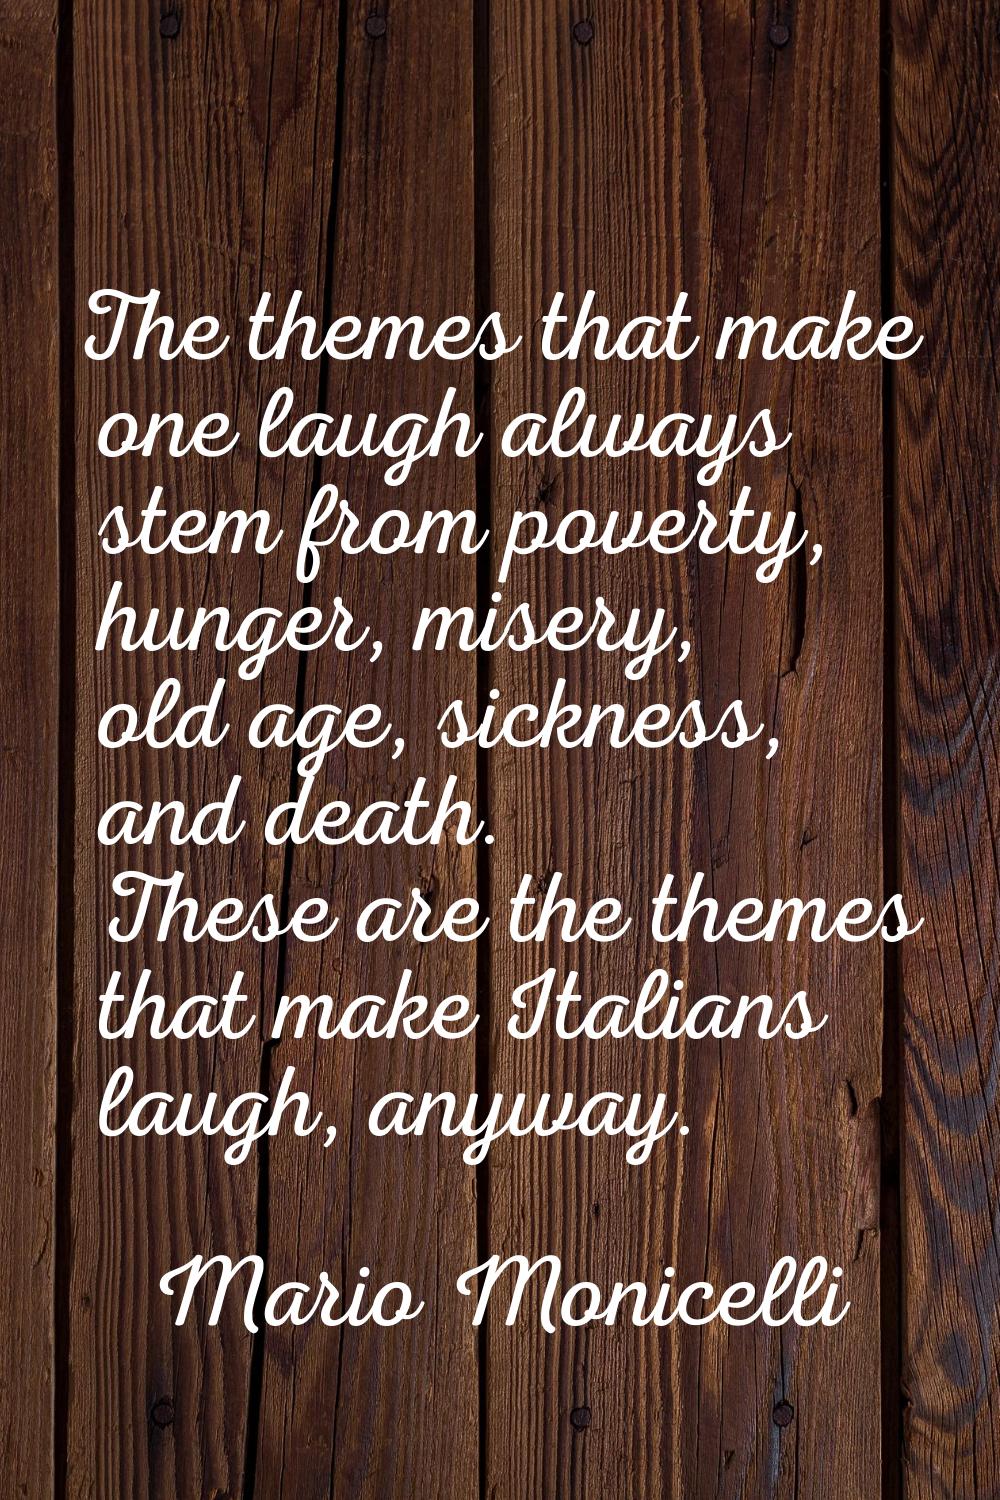 The themes that make one laugh always stem from poverty, hunger, misery, old age, sickness, and dea